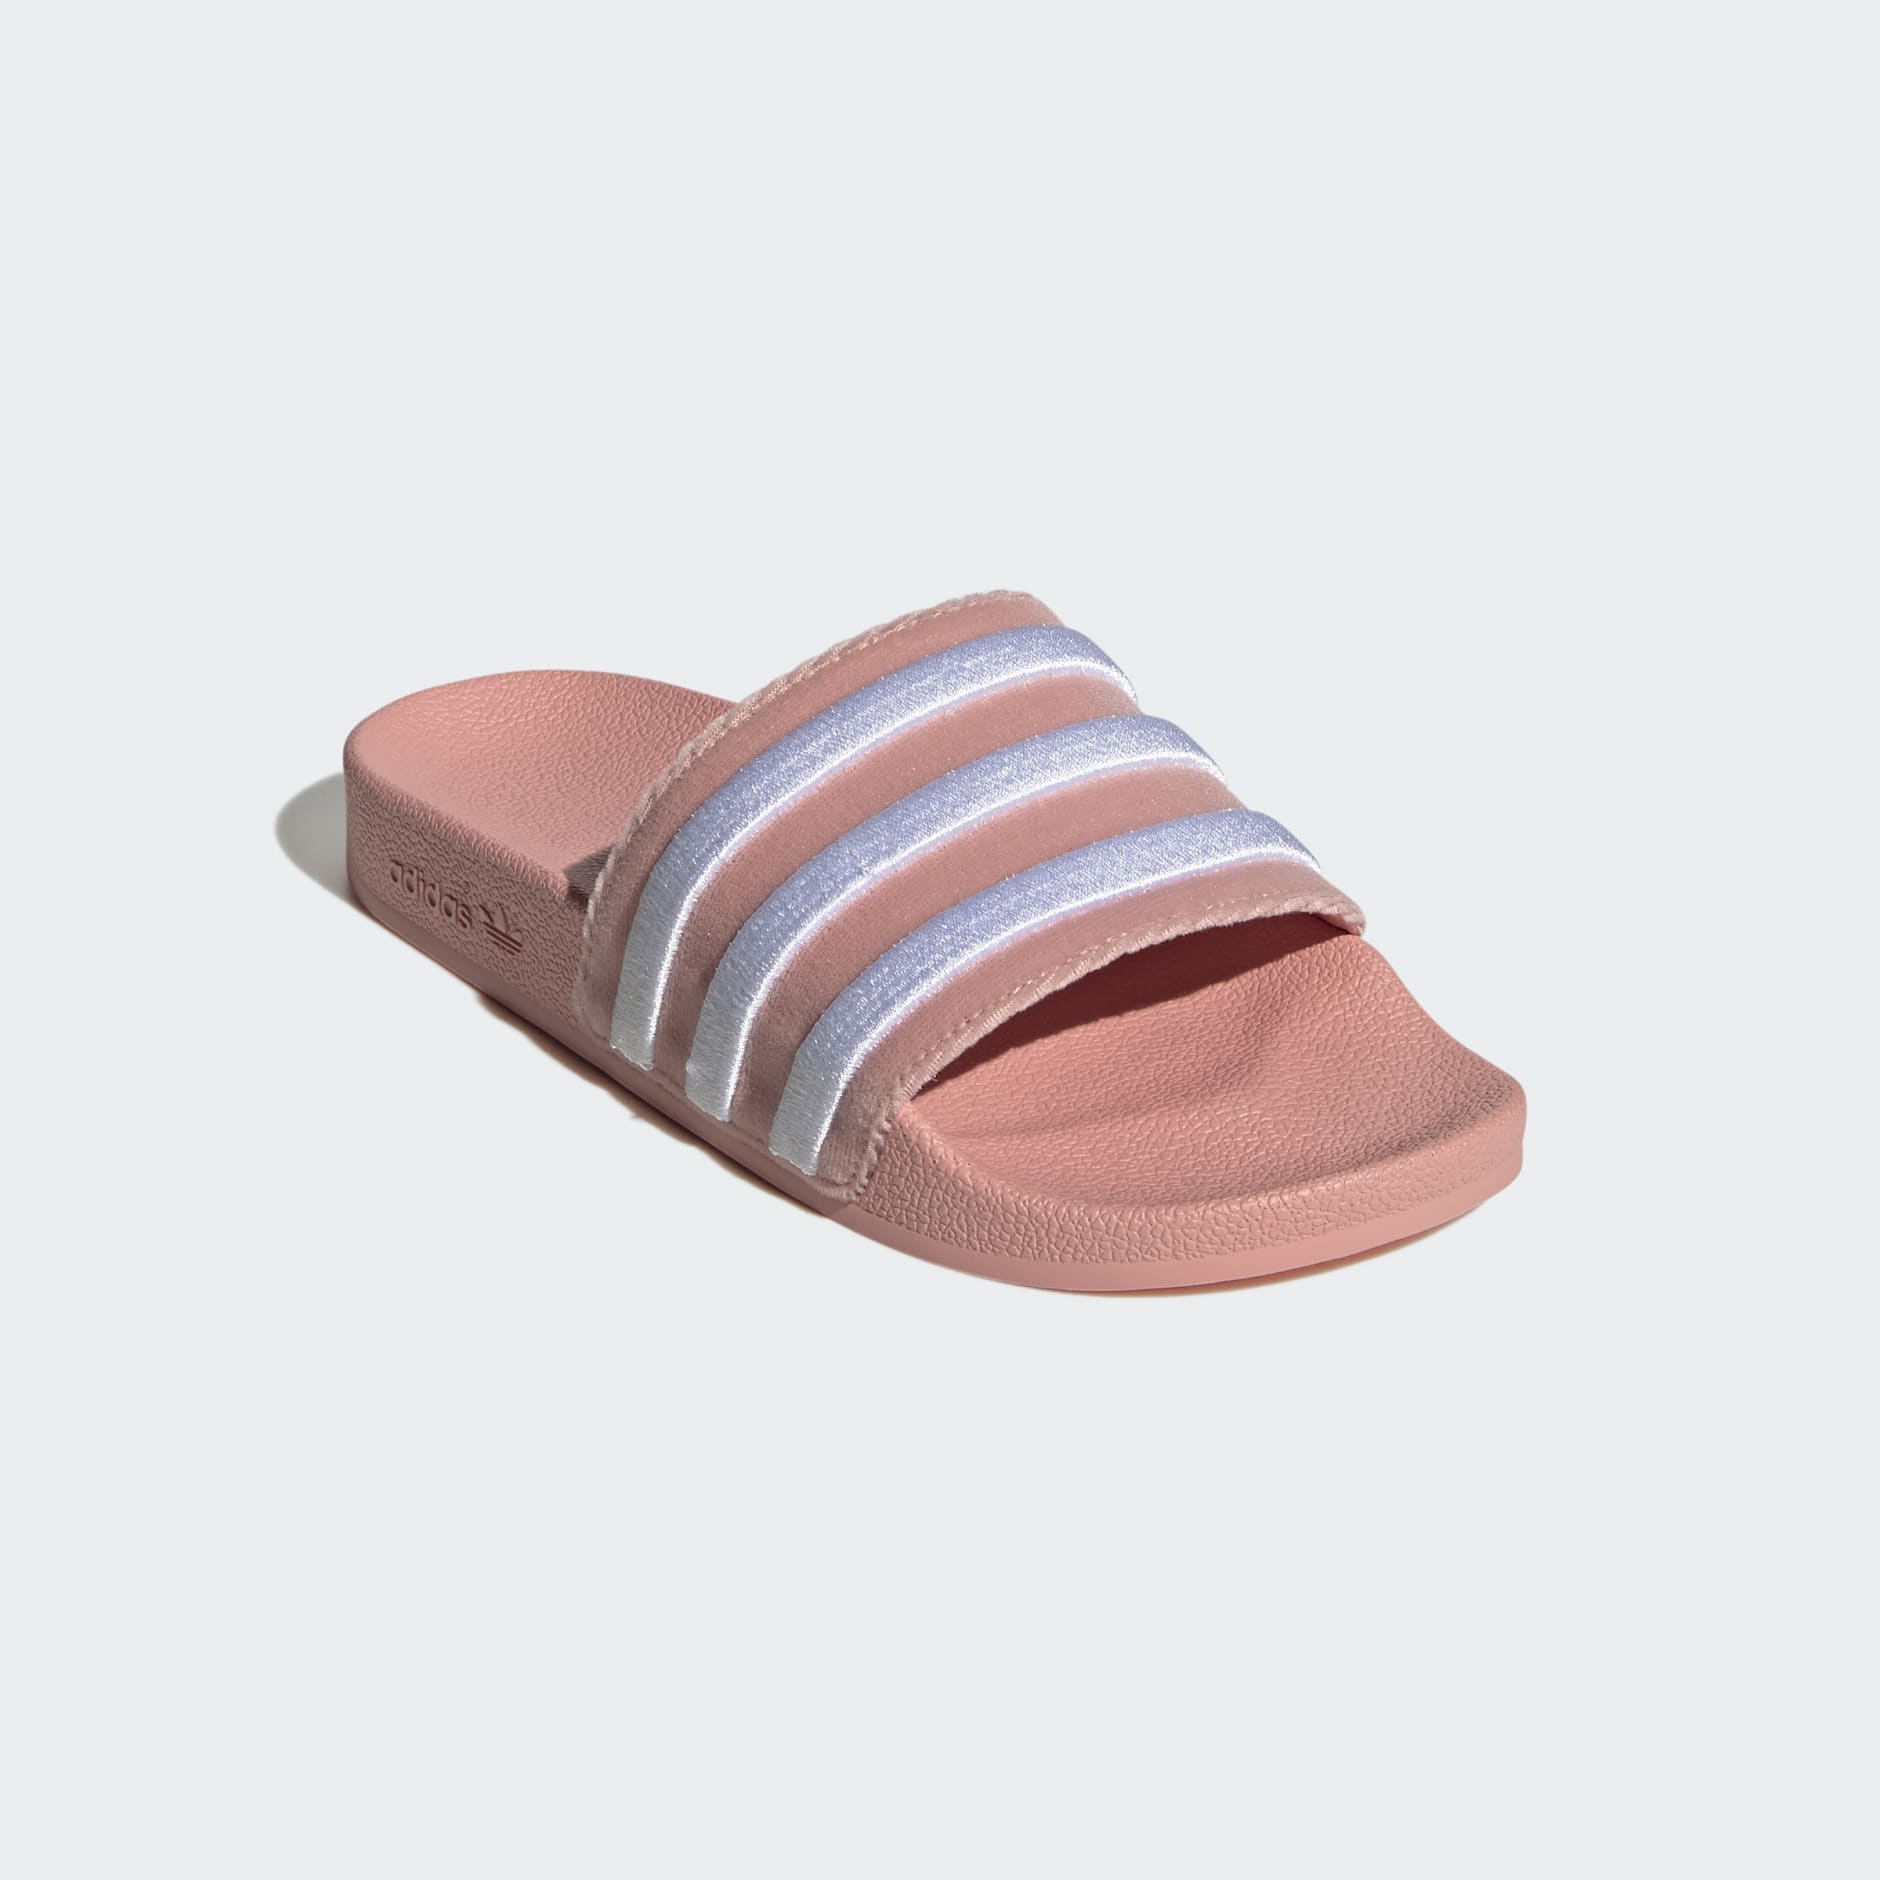 Booth duurzame grondstof vier keer Women's Shoes - Adilette Slides - Pink | adidas Bahrain